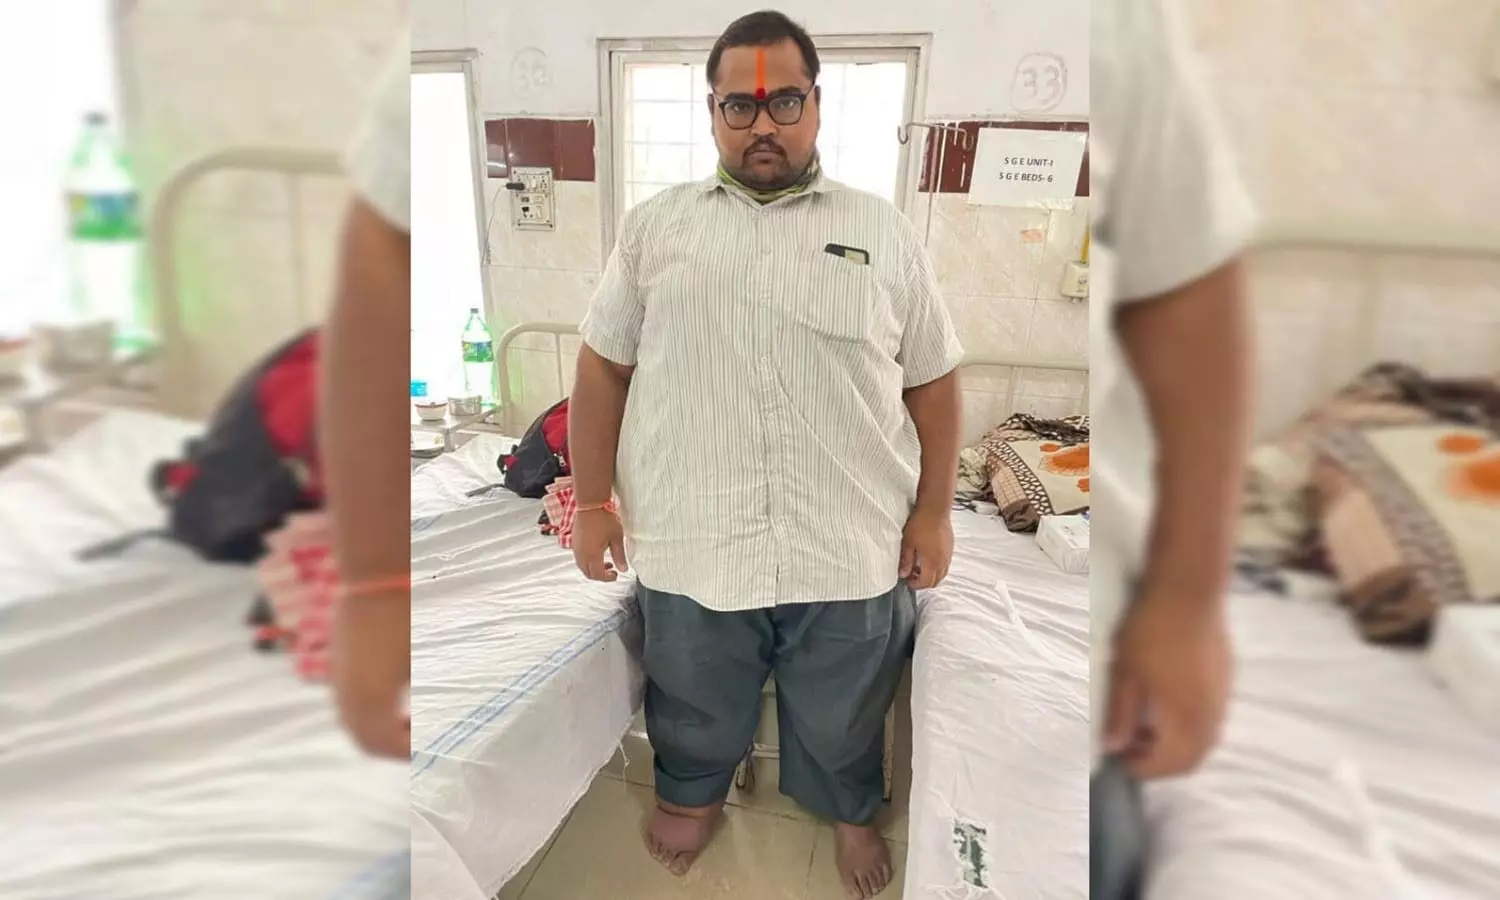 Osmania hospital doctors perform rare surgery on highly obese patient